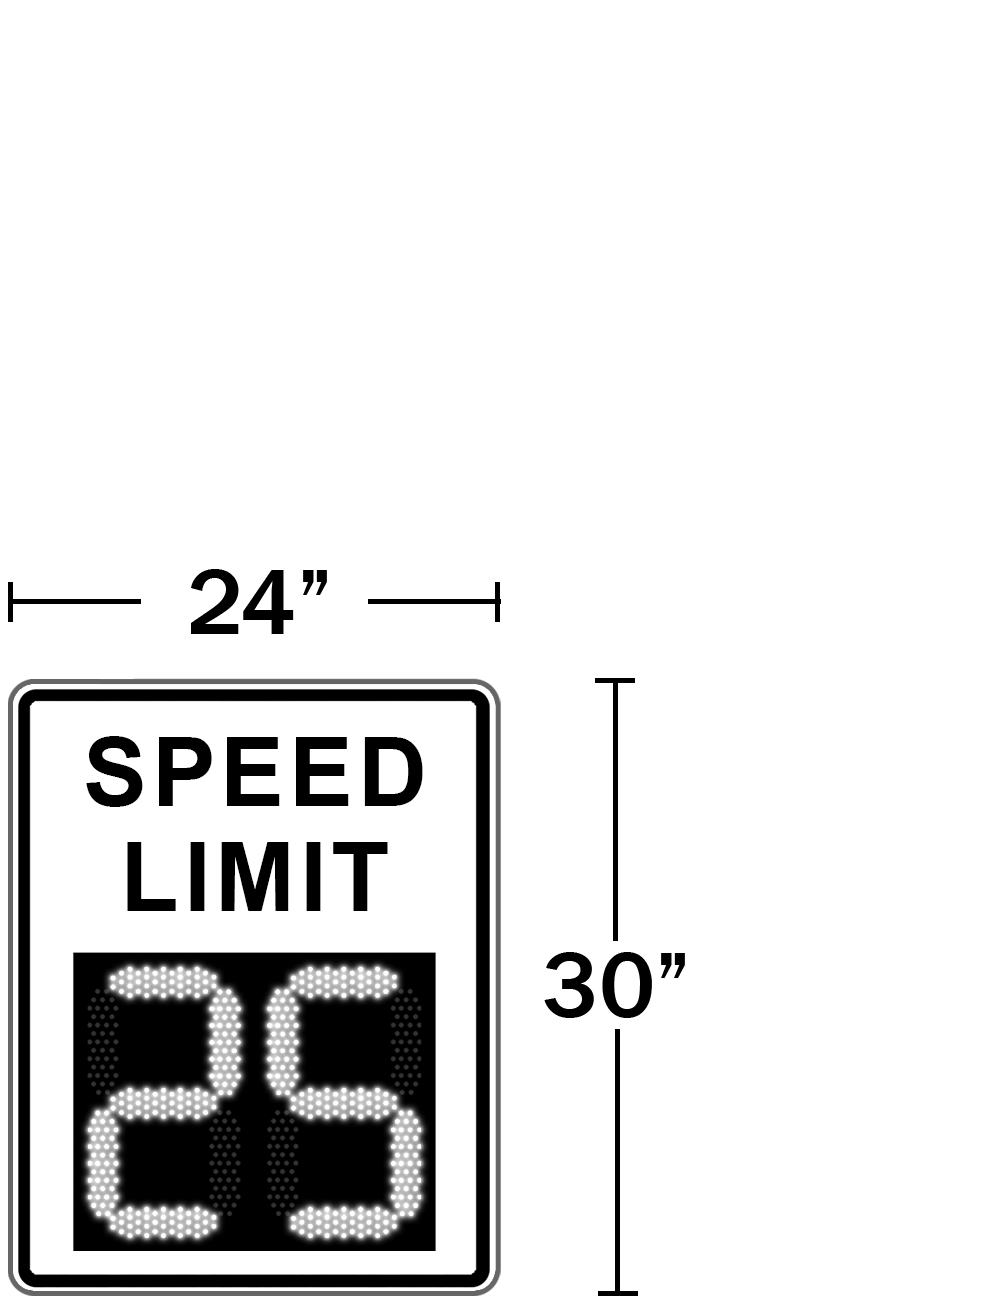 VCalm®VSL12 Variable Speed Limit Sign Dimensions